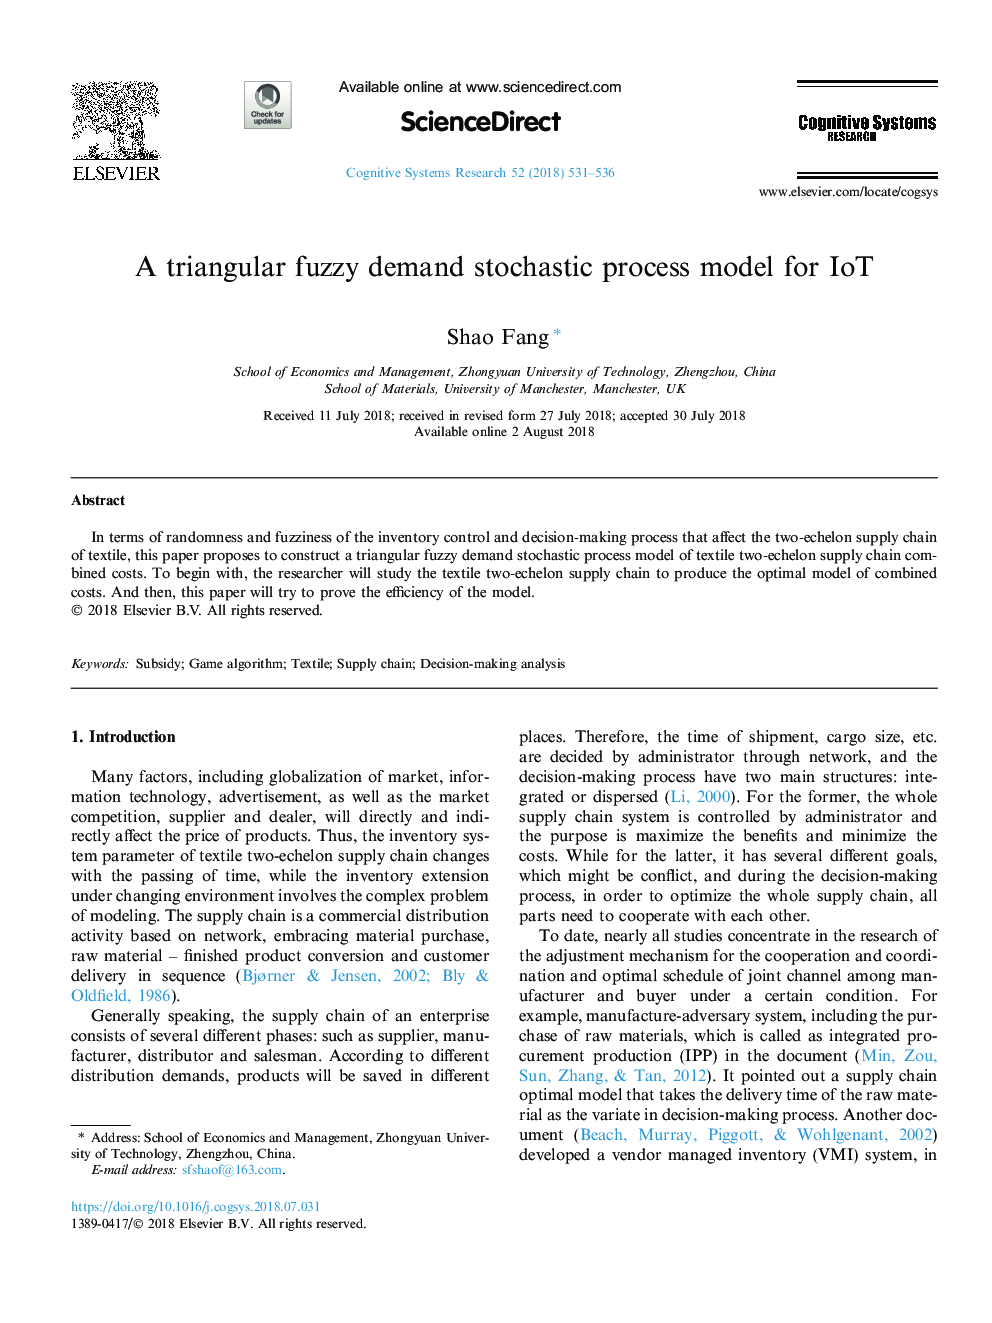 A triangular fuzzy demand stochastic process model for IoT